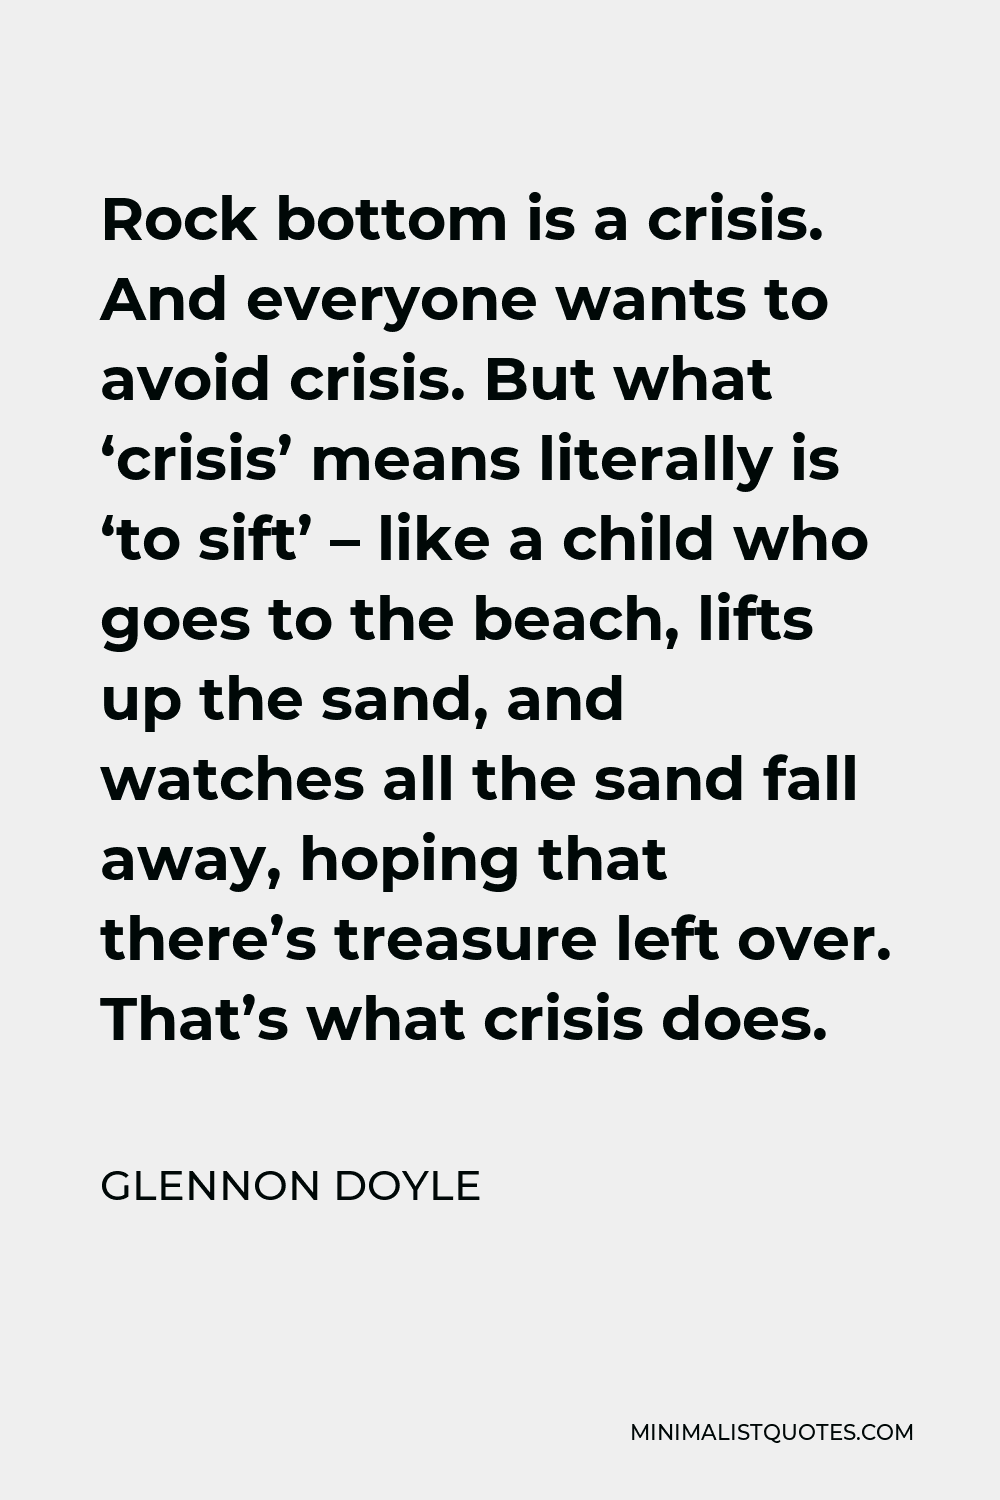 Glennon Doyle Quote - Rock bottom is a crisis. And everyone wants to avoid crisis. But what ‘crisis’ means literally is ‘to sift’ – like a child who goes to the beach, lifts up the sand, and watches all the sand fall away, hoping that there’s treasure left over. That’s what crisis does.